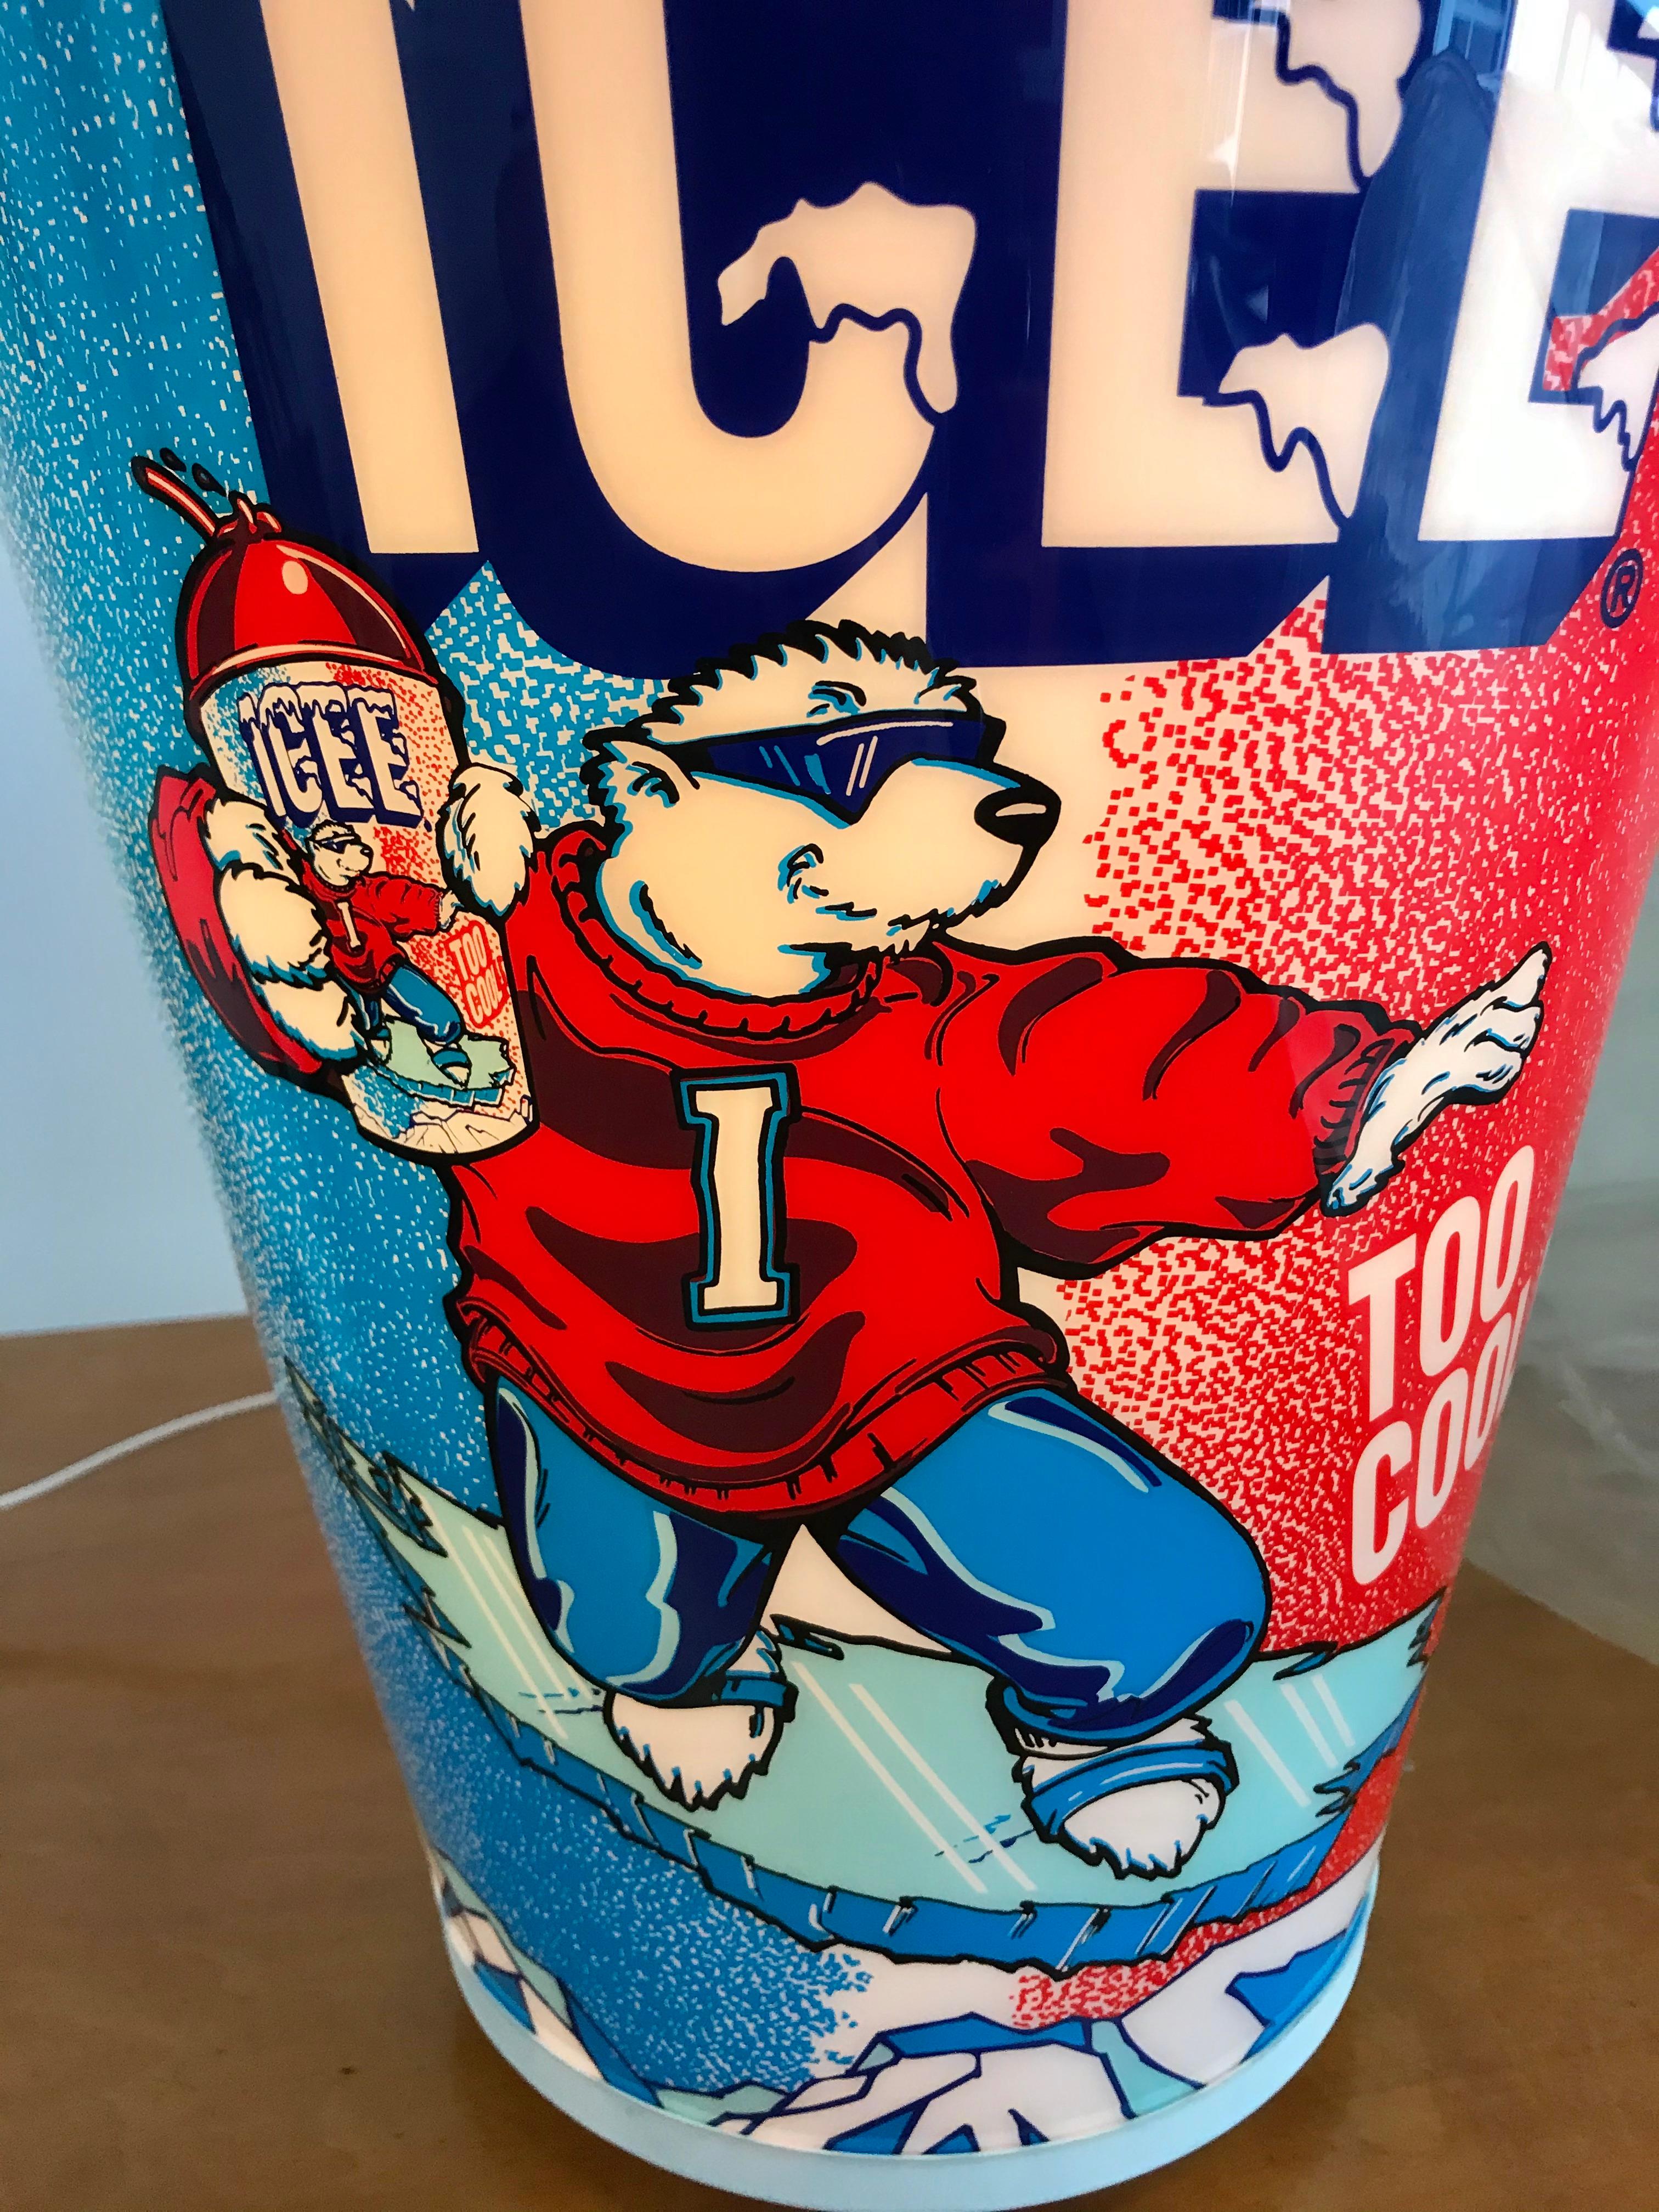 icee cups for sale